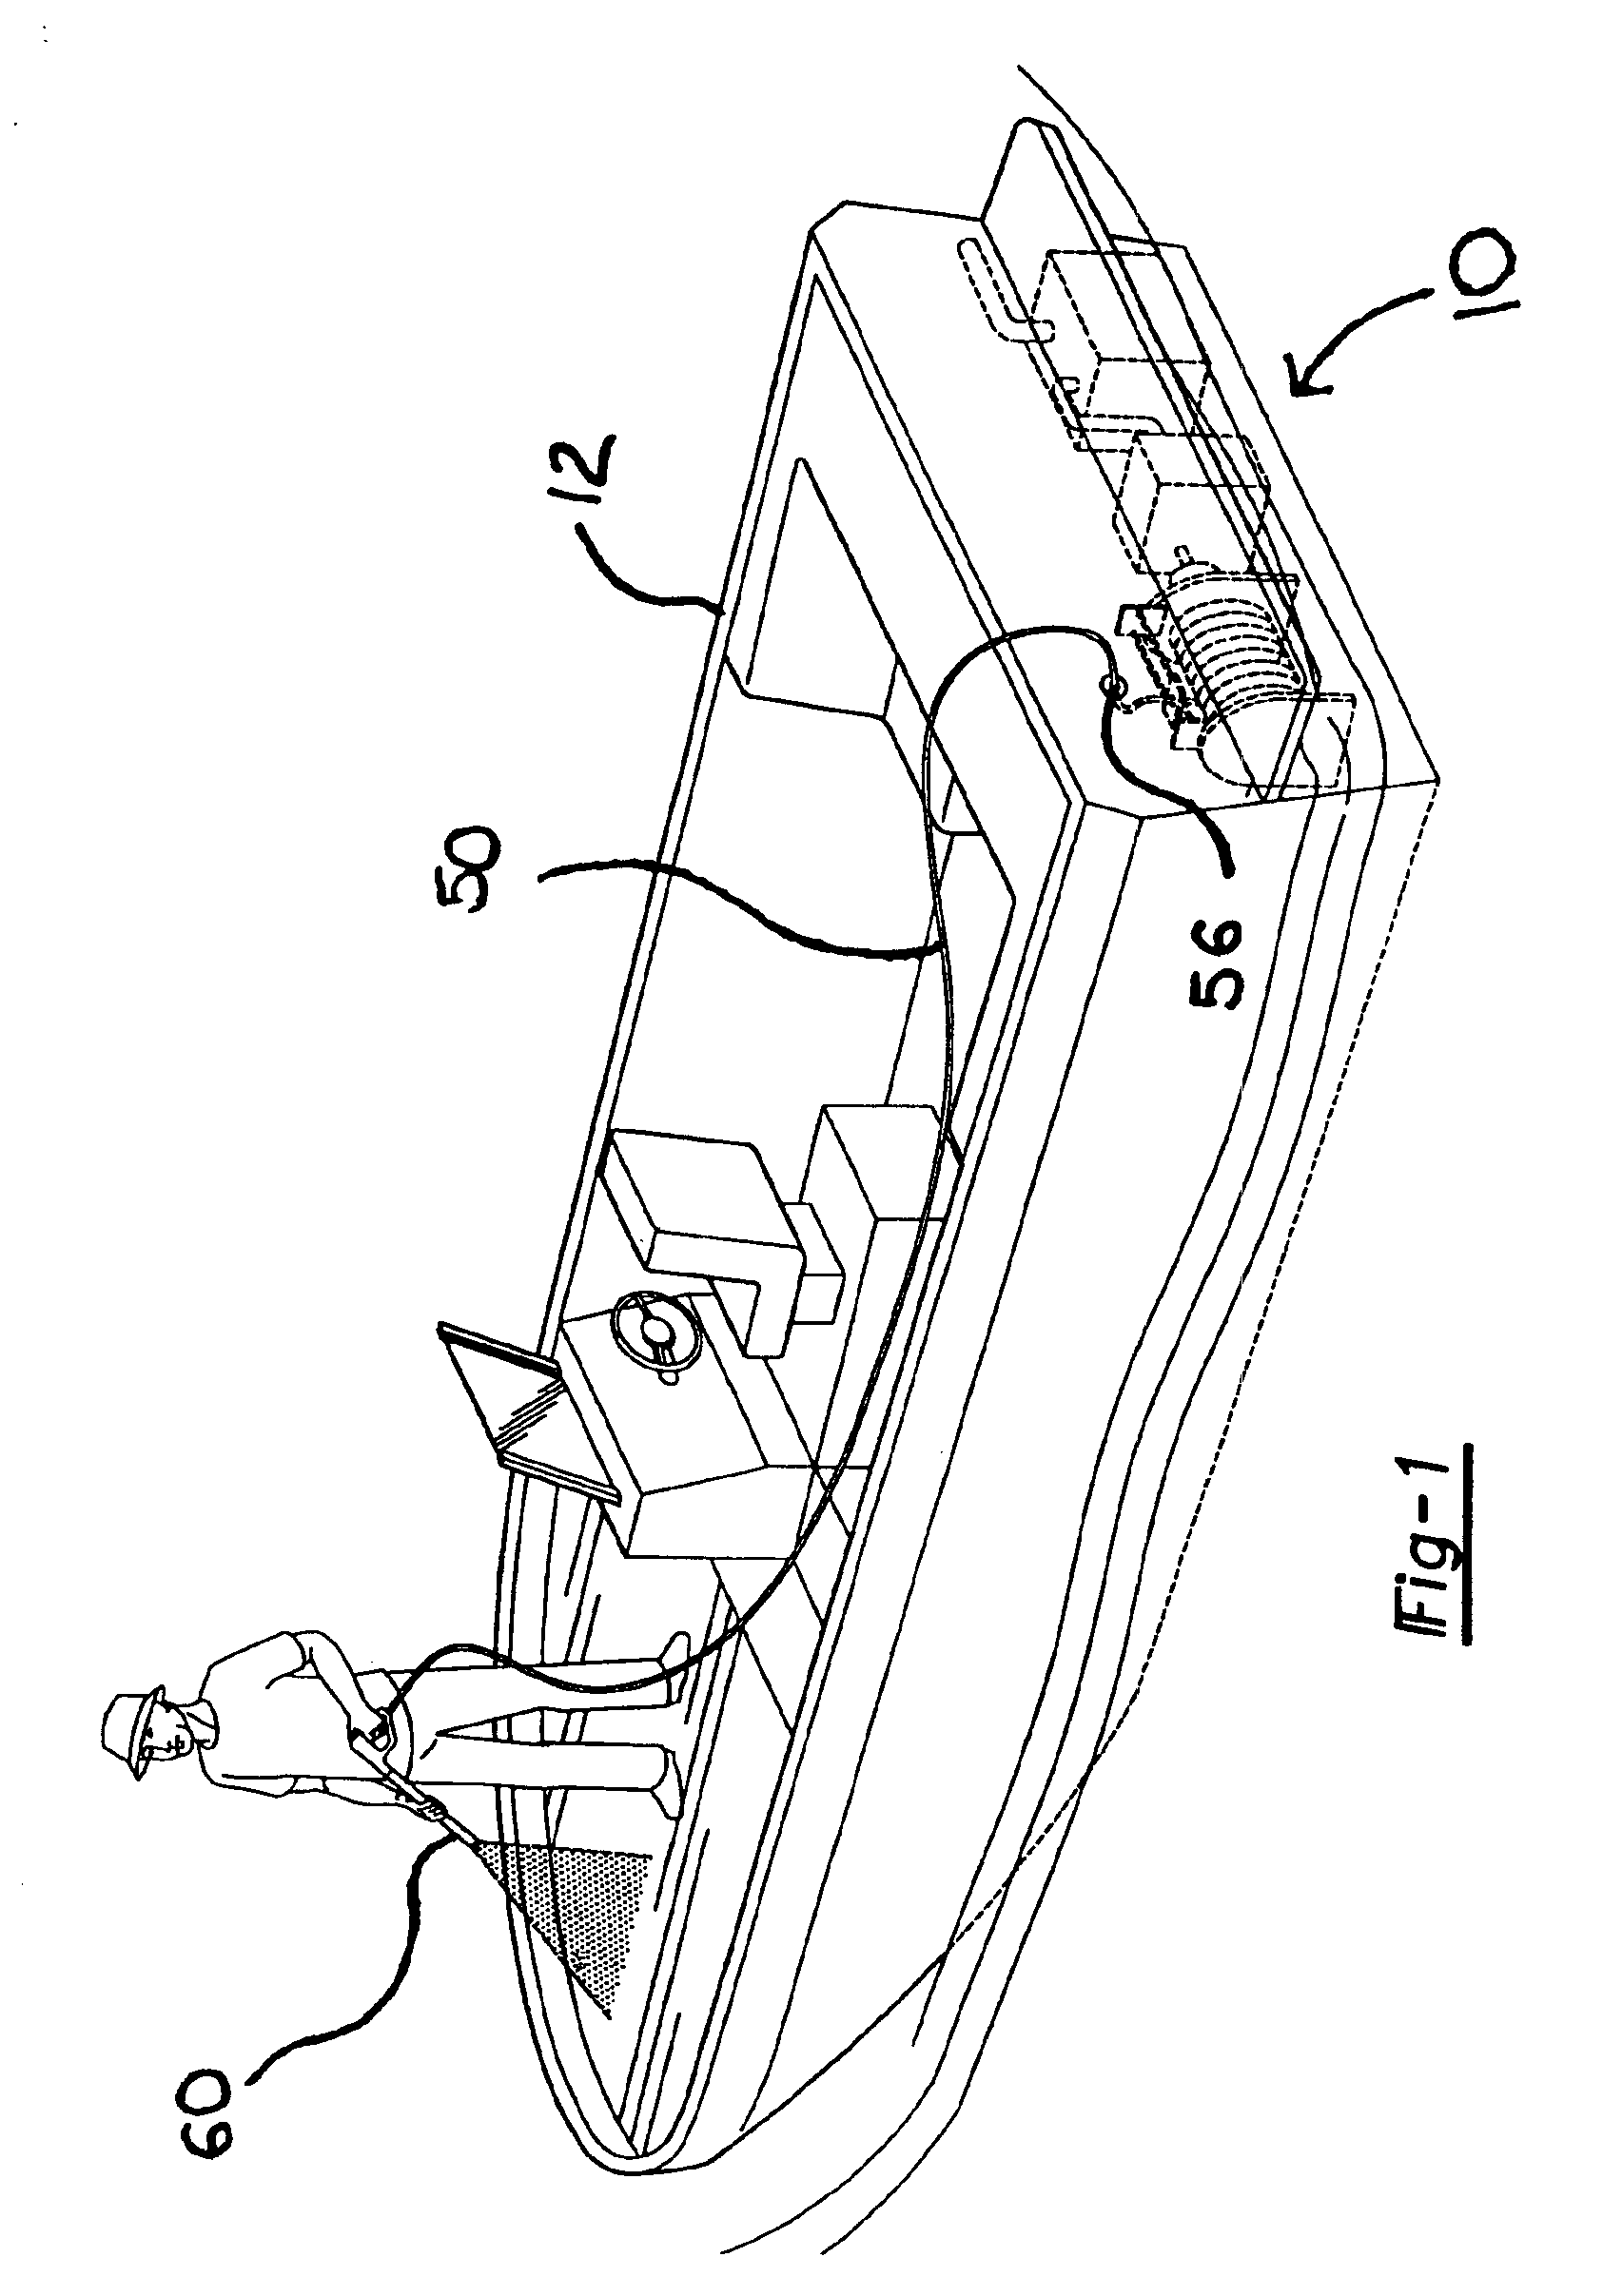 Boat/RV mounted pressure-wash system